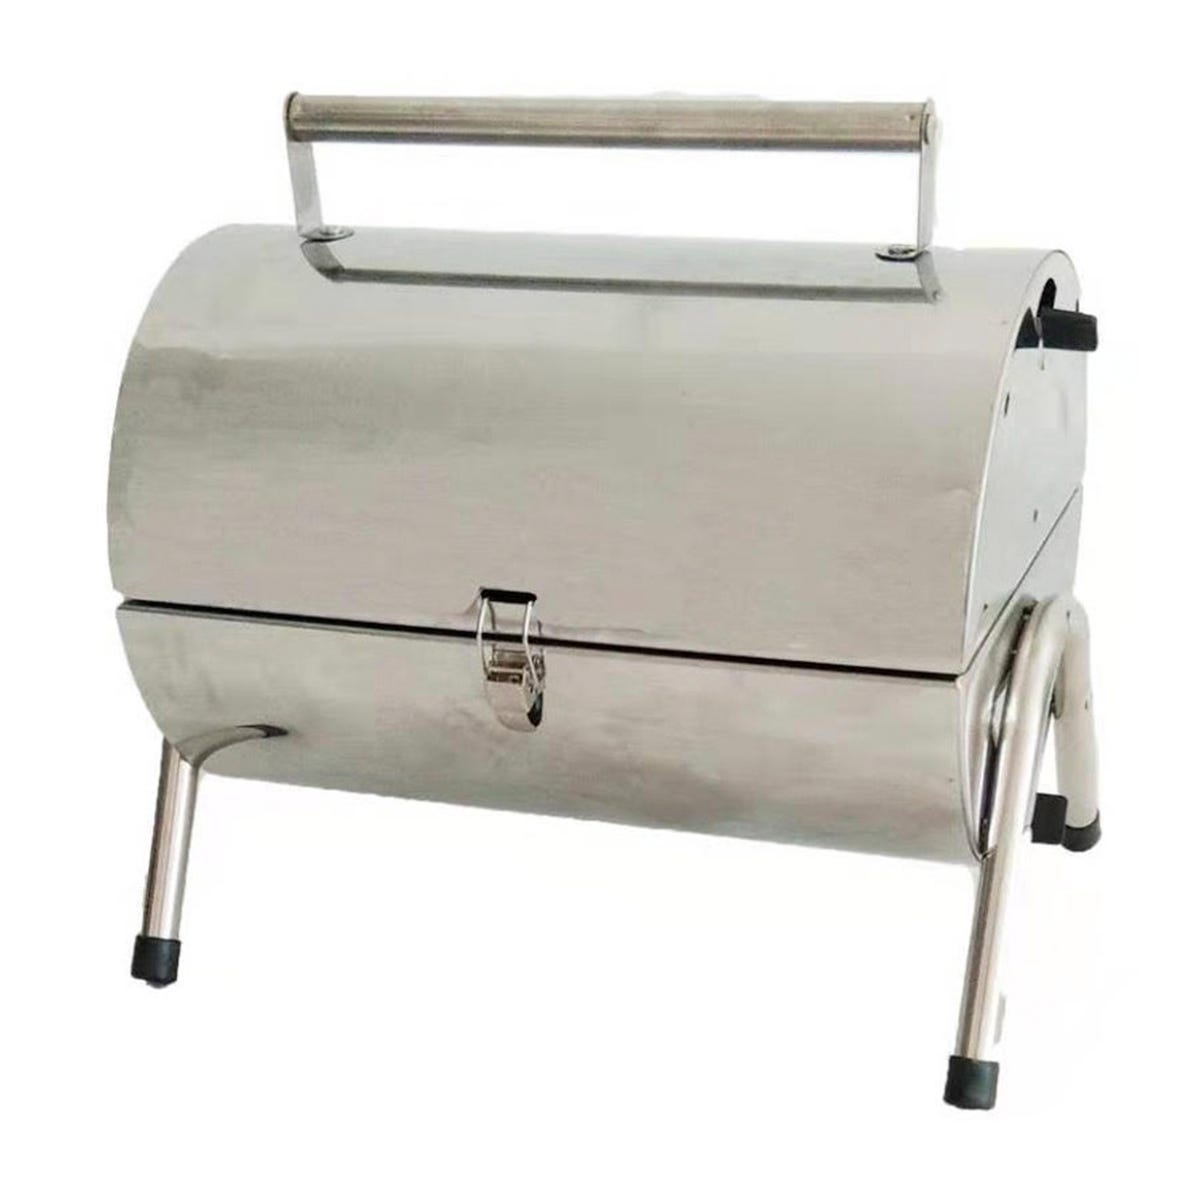 Flamemaster Portable Barrel Charcoal BBQ - Stainless steel